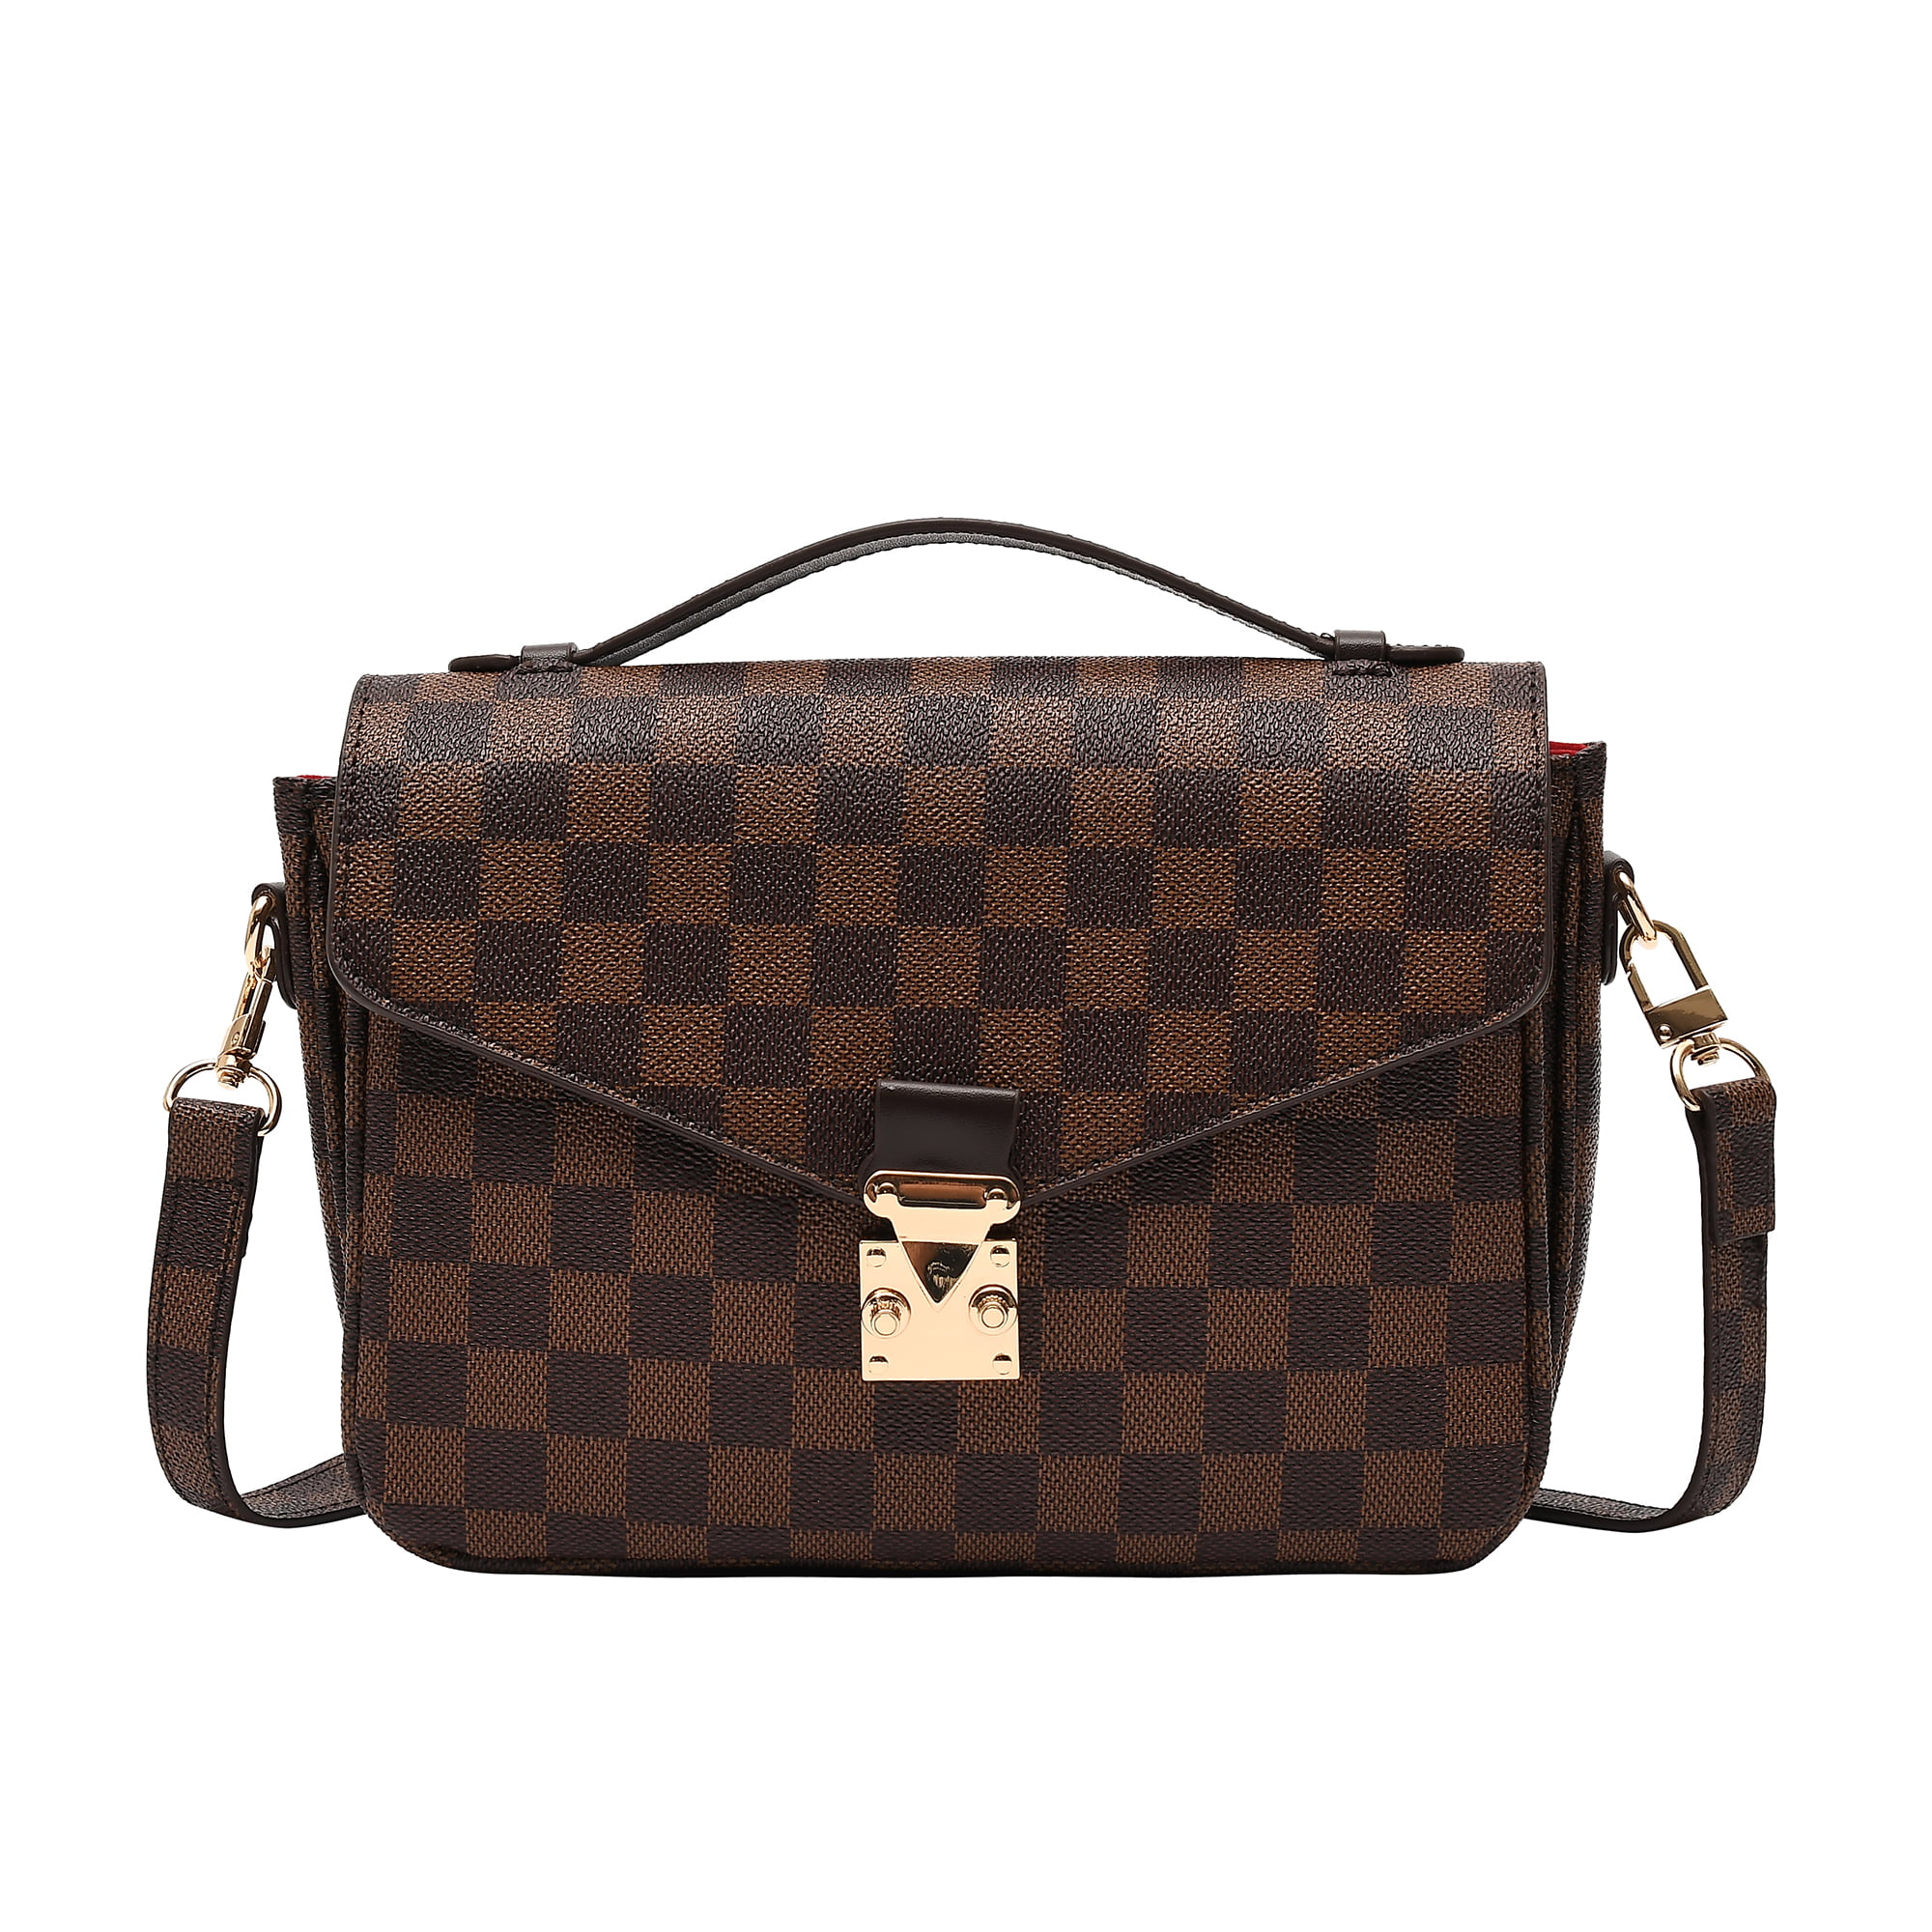 MK Gdledy Brown Checkered Crossbody Bags for Women Multipurpose Handbags  Leather Shoulder with Coin Purse including 3 Size Bag - Brown2